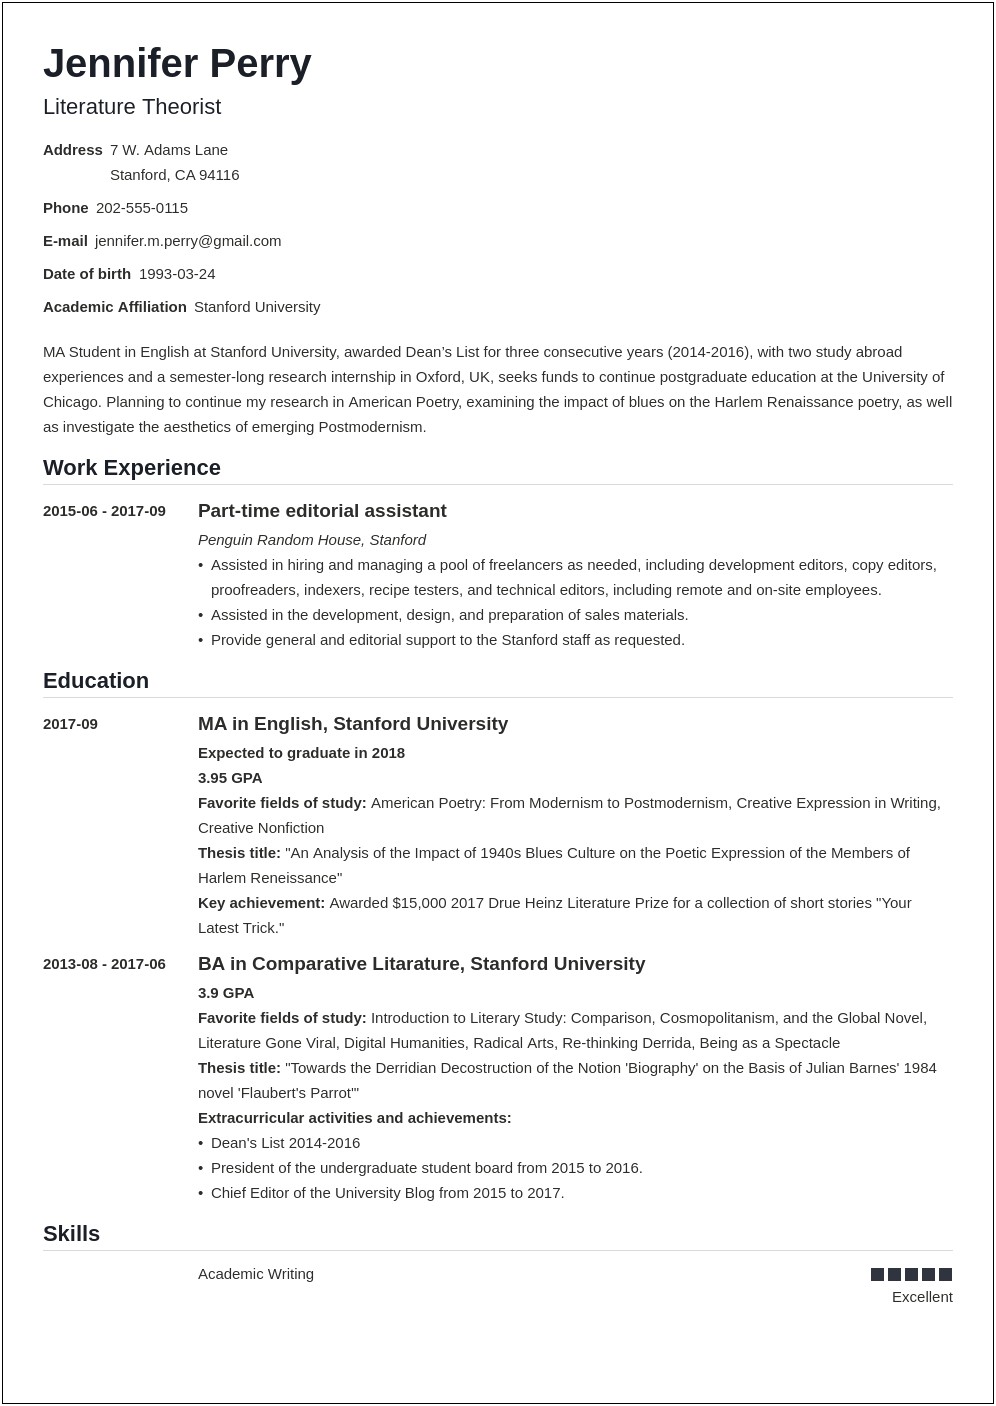 Resume Objective Statement Examples For Graduate School